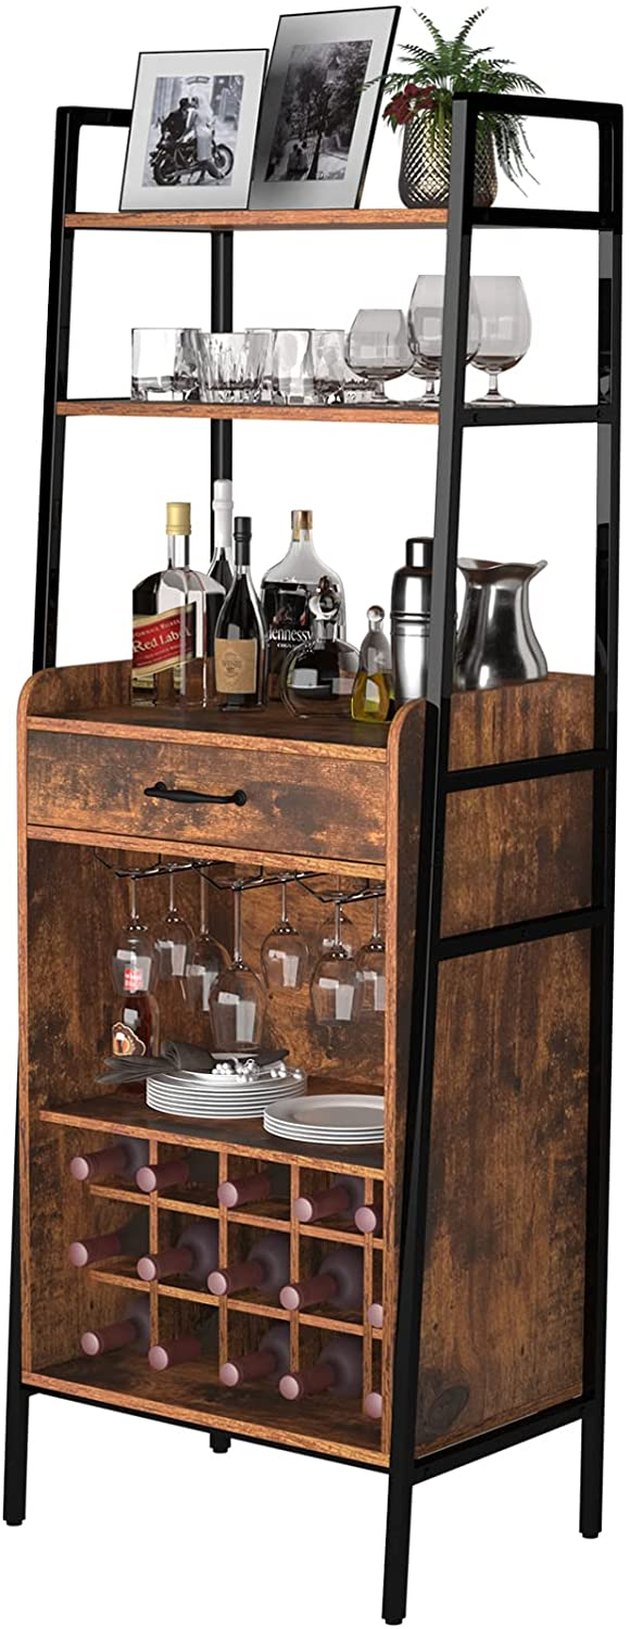 Brew your favorite cup of coffee in the morning, and enjoy wine in the evening. This multifunctional bar stores up to 15 bottles of wine and comes with extra storage space for other accessories.